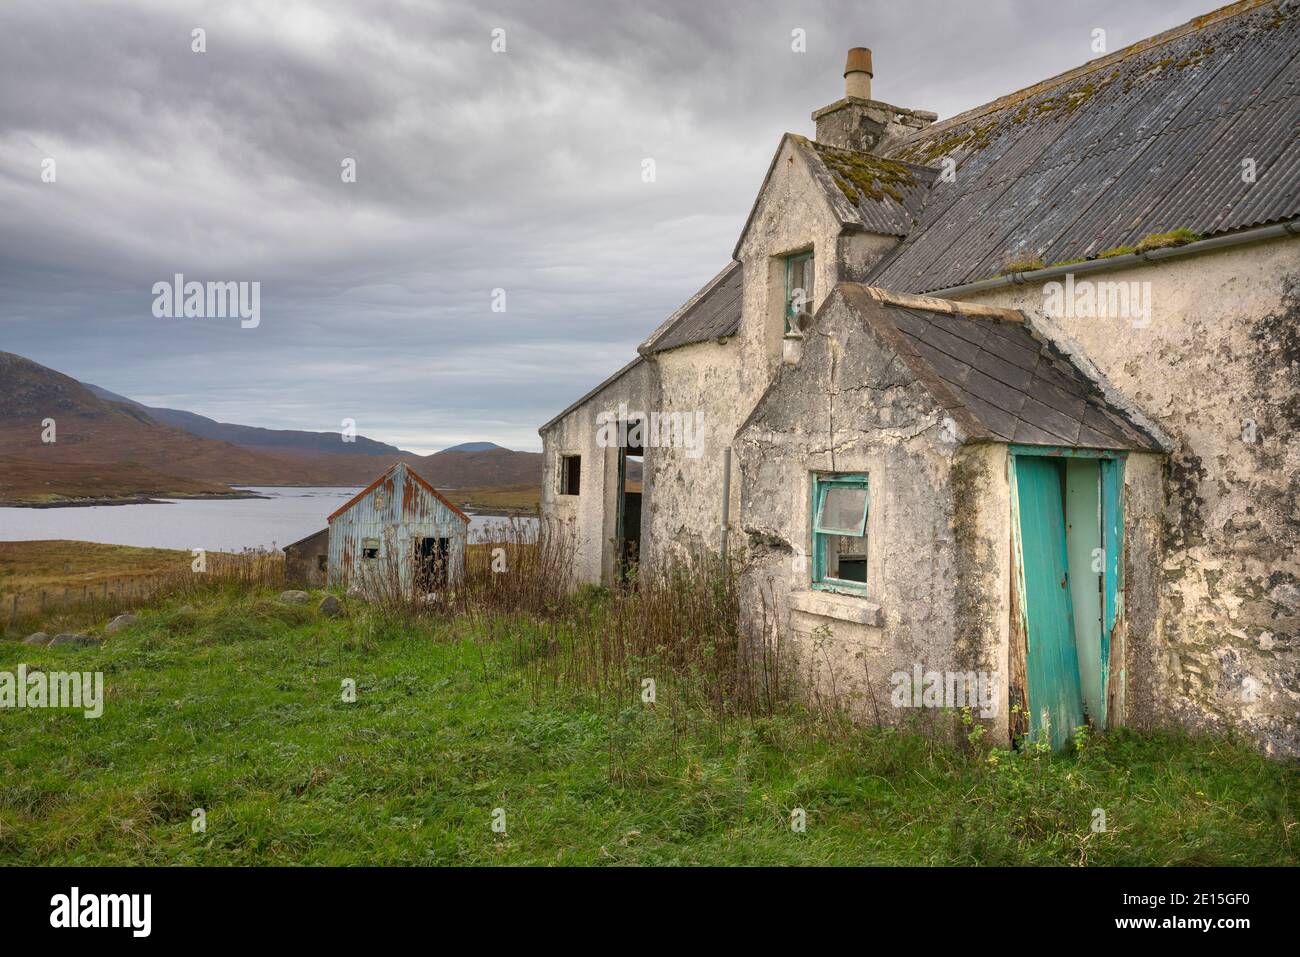 Isle of Lewis, Outer Hebridies Scotland: Abandoned isolated house wtih turquoise door Stock Photo